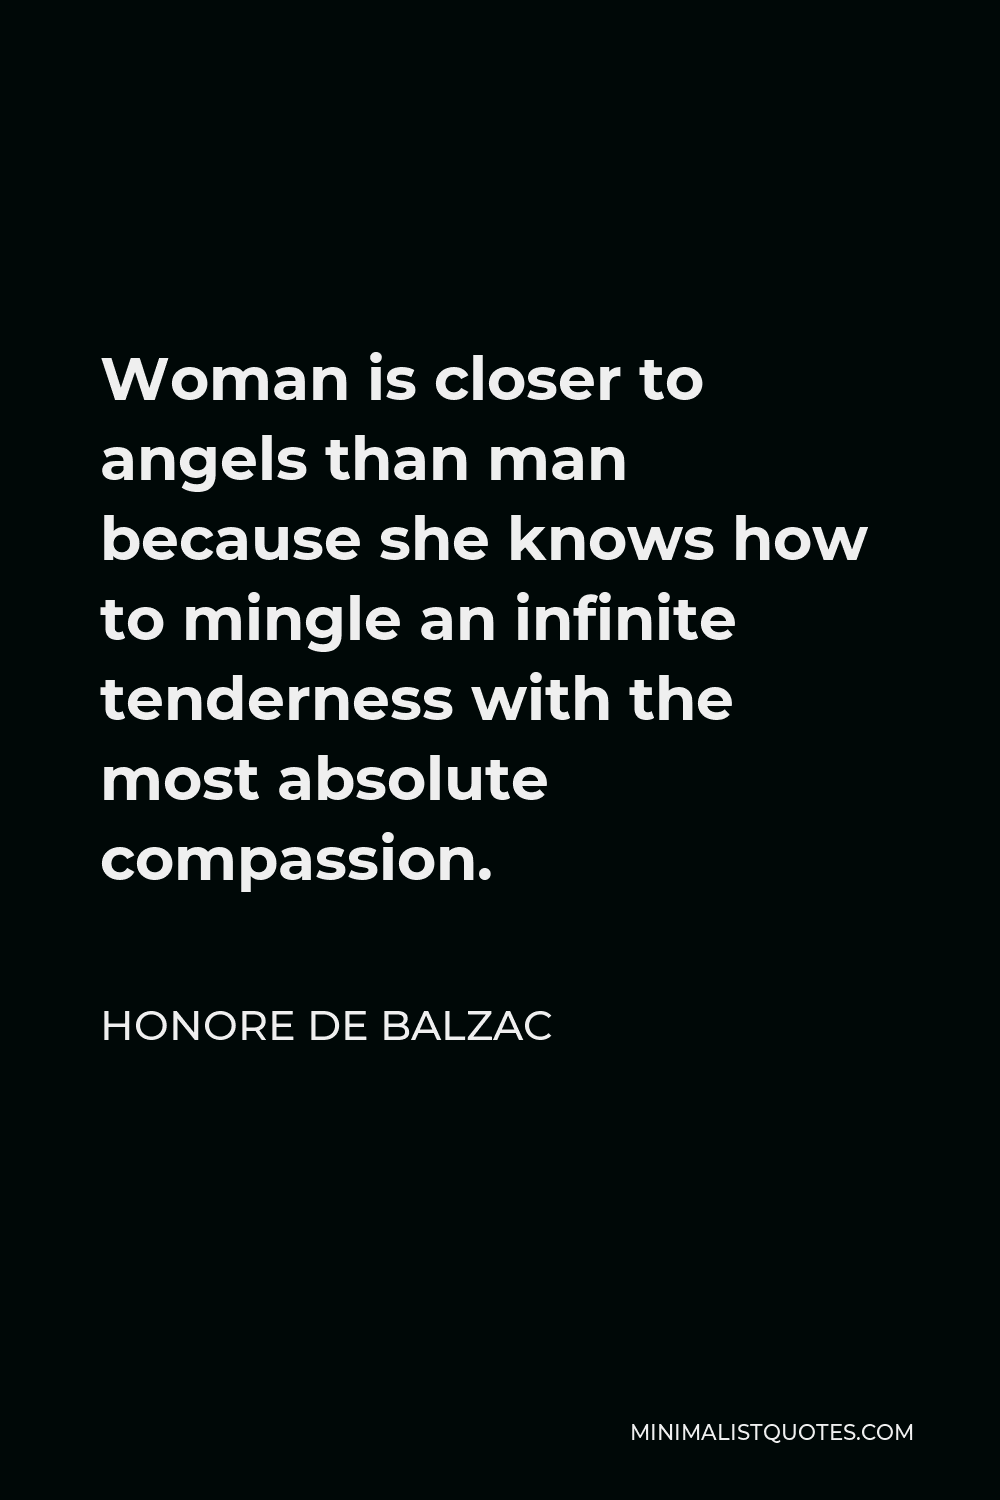 Honore de Balzac Quote - Woman is closer to angels than man because she knows how to mingle an infinite tenderness with the most absolute compassion.